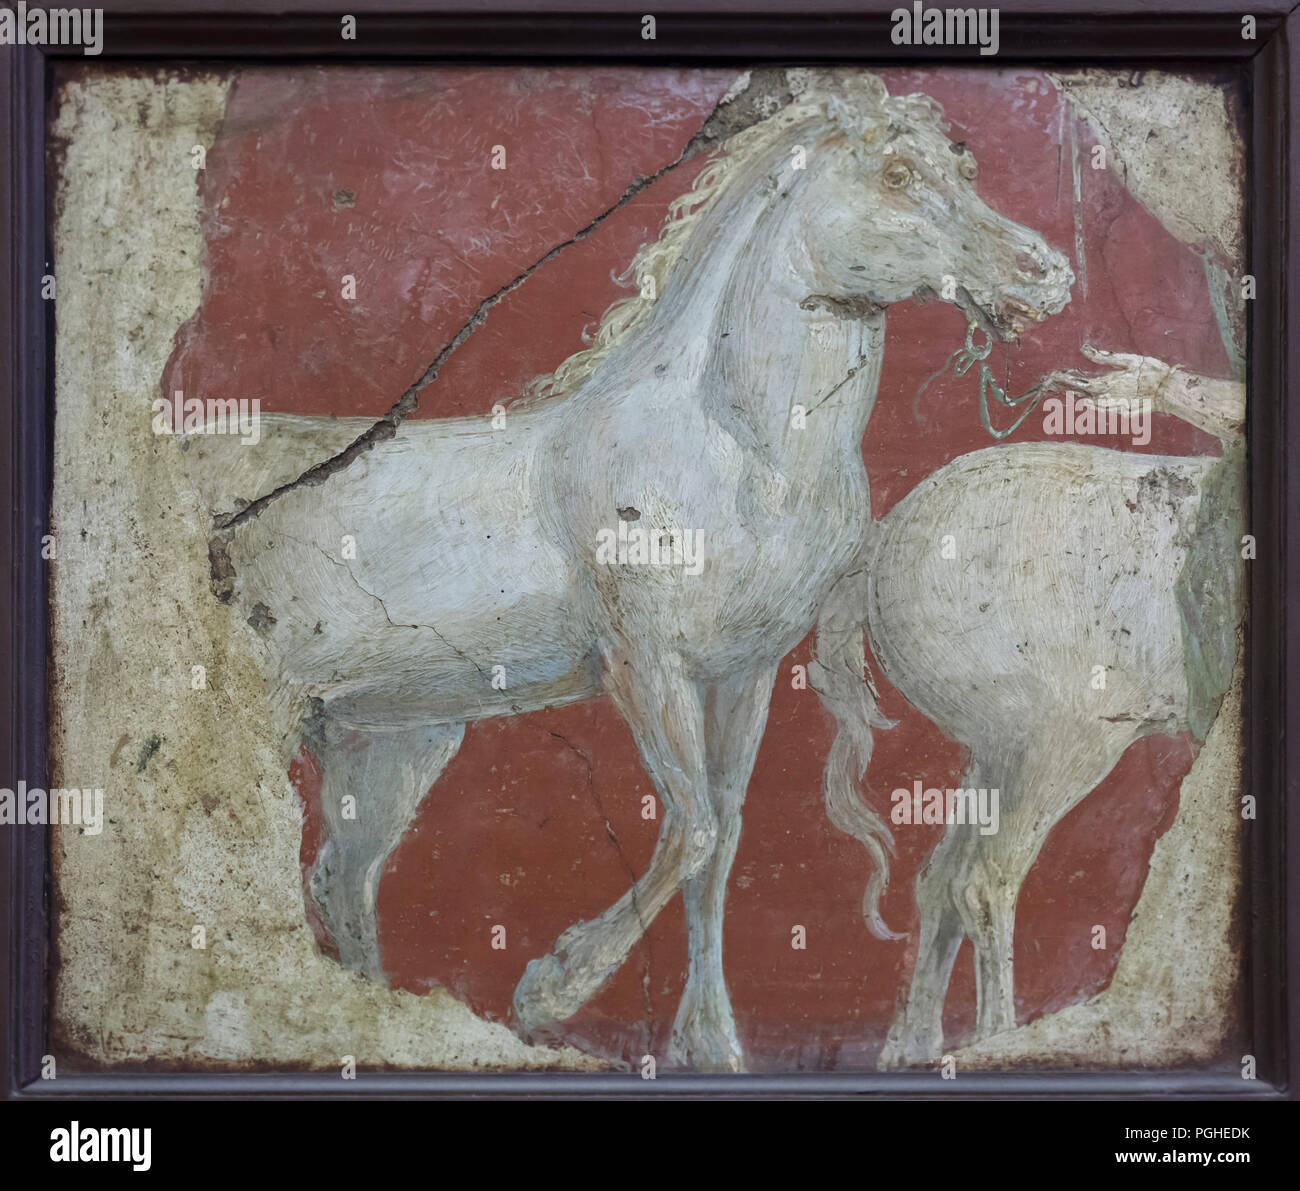 Running horses depicted in the Roman fresco, perhaps from a frieze, from the Villa Ariadne (Villa Arianna) in Stabiae, now on display in the National Archaeological Museum (Museo Archeologico Nazionale di Napoli) in Naples, Campania, Italy. Stock Photo